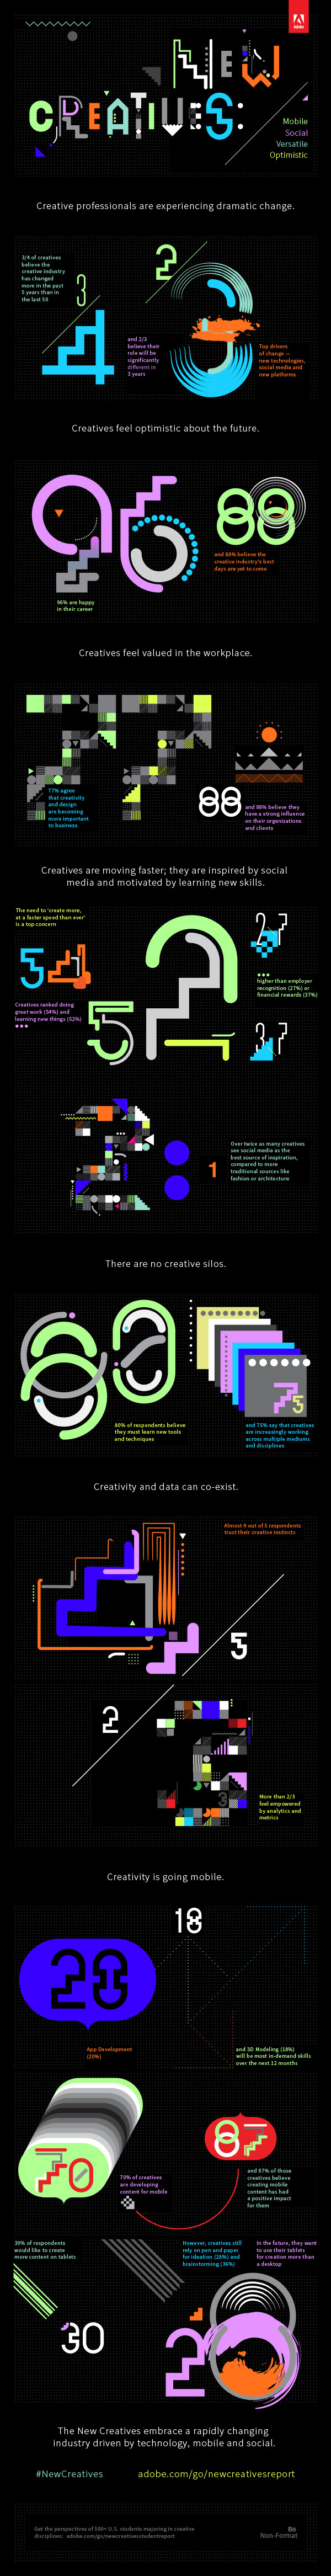 adobe non-format infographic New Creatives